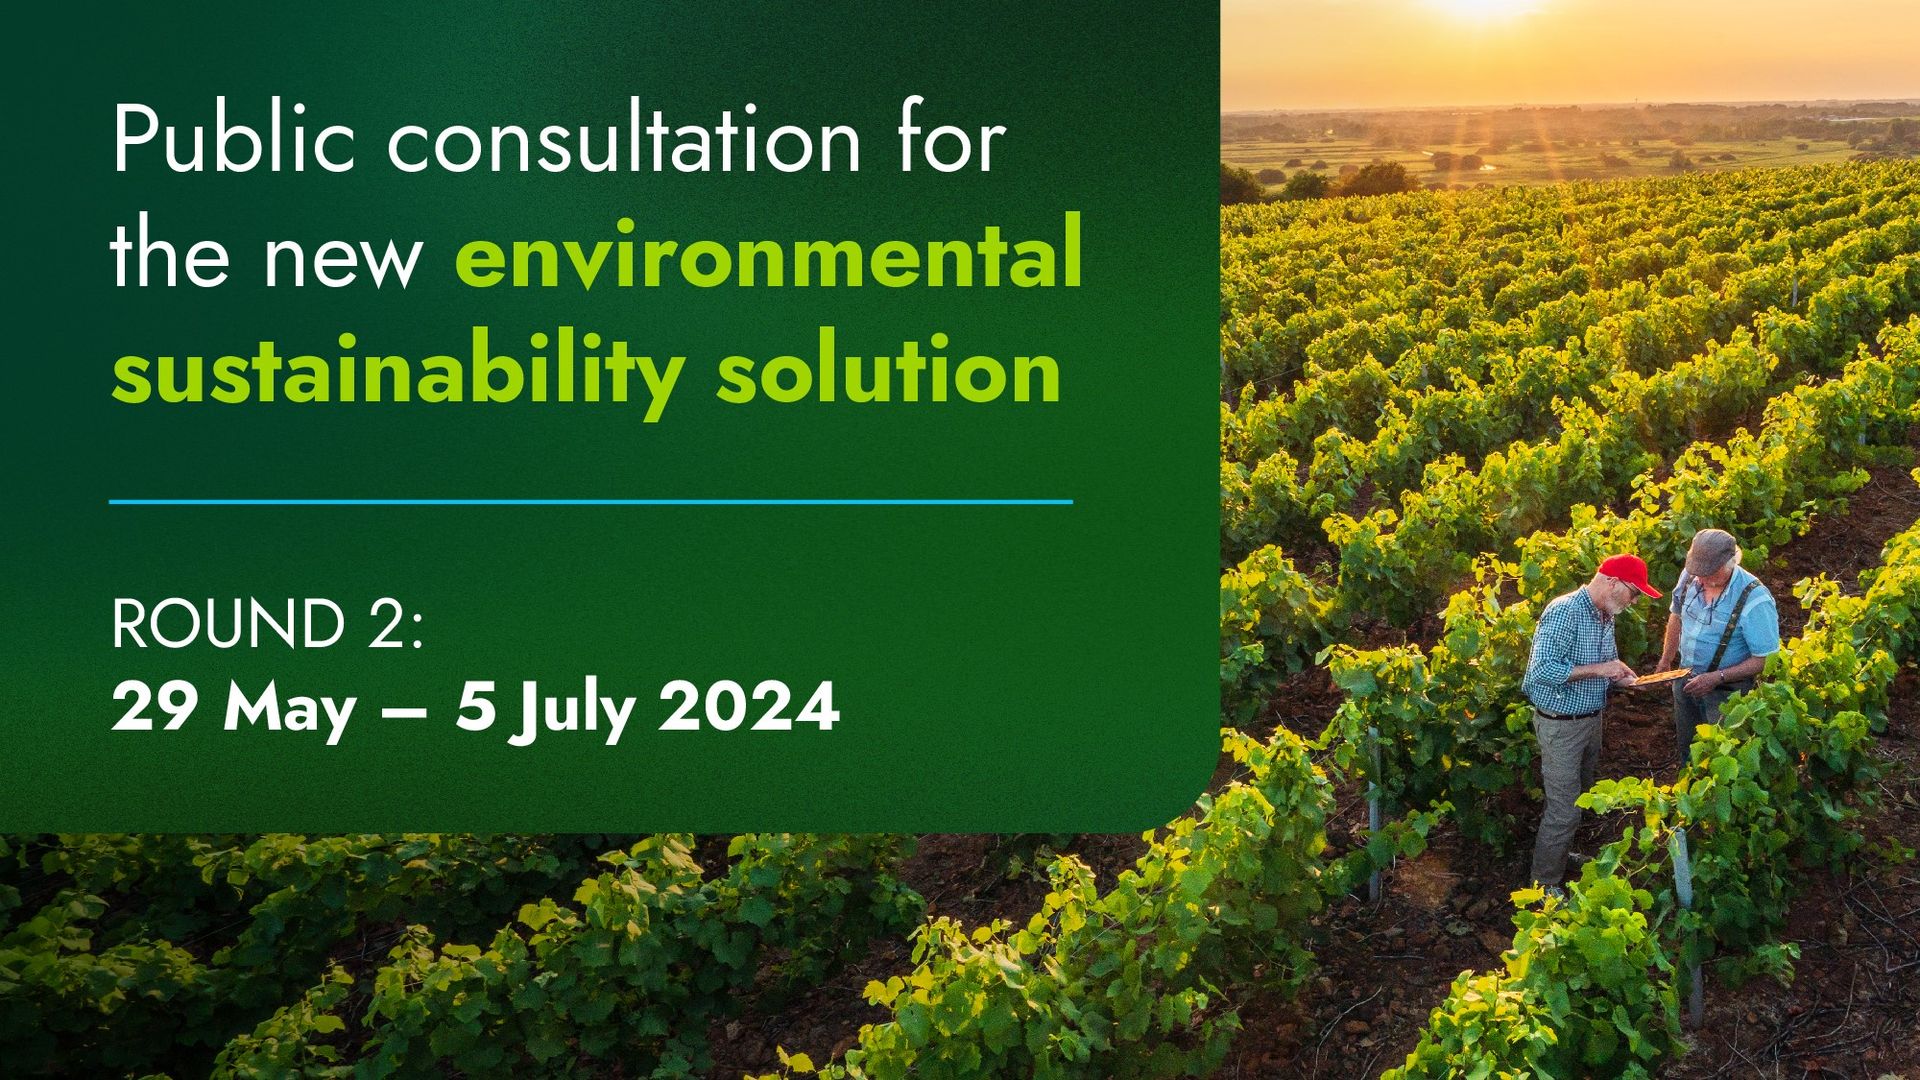 Round 2 public consultation open from 29 May to 5 July 2024. Public consultation for the new environmental sustainability solution from GLOBALG.A.P. 